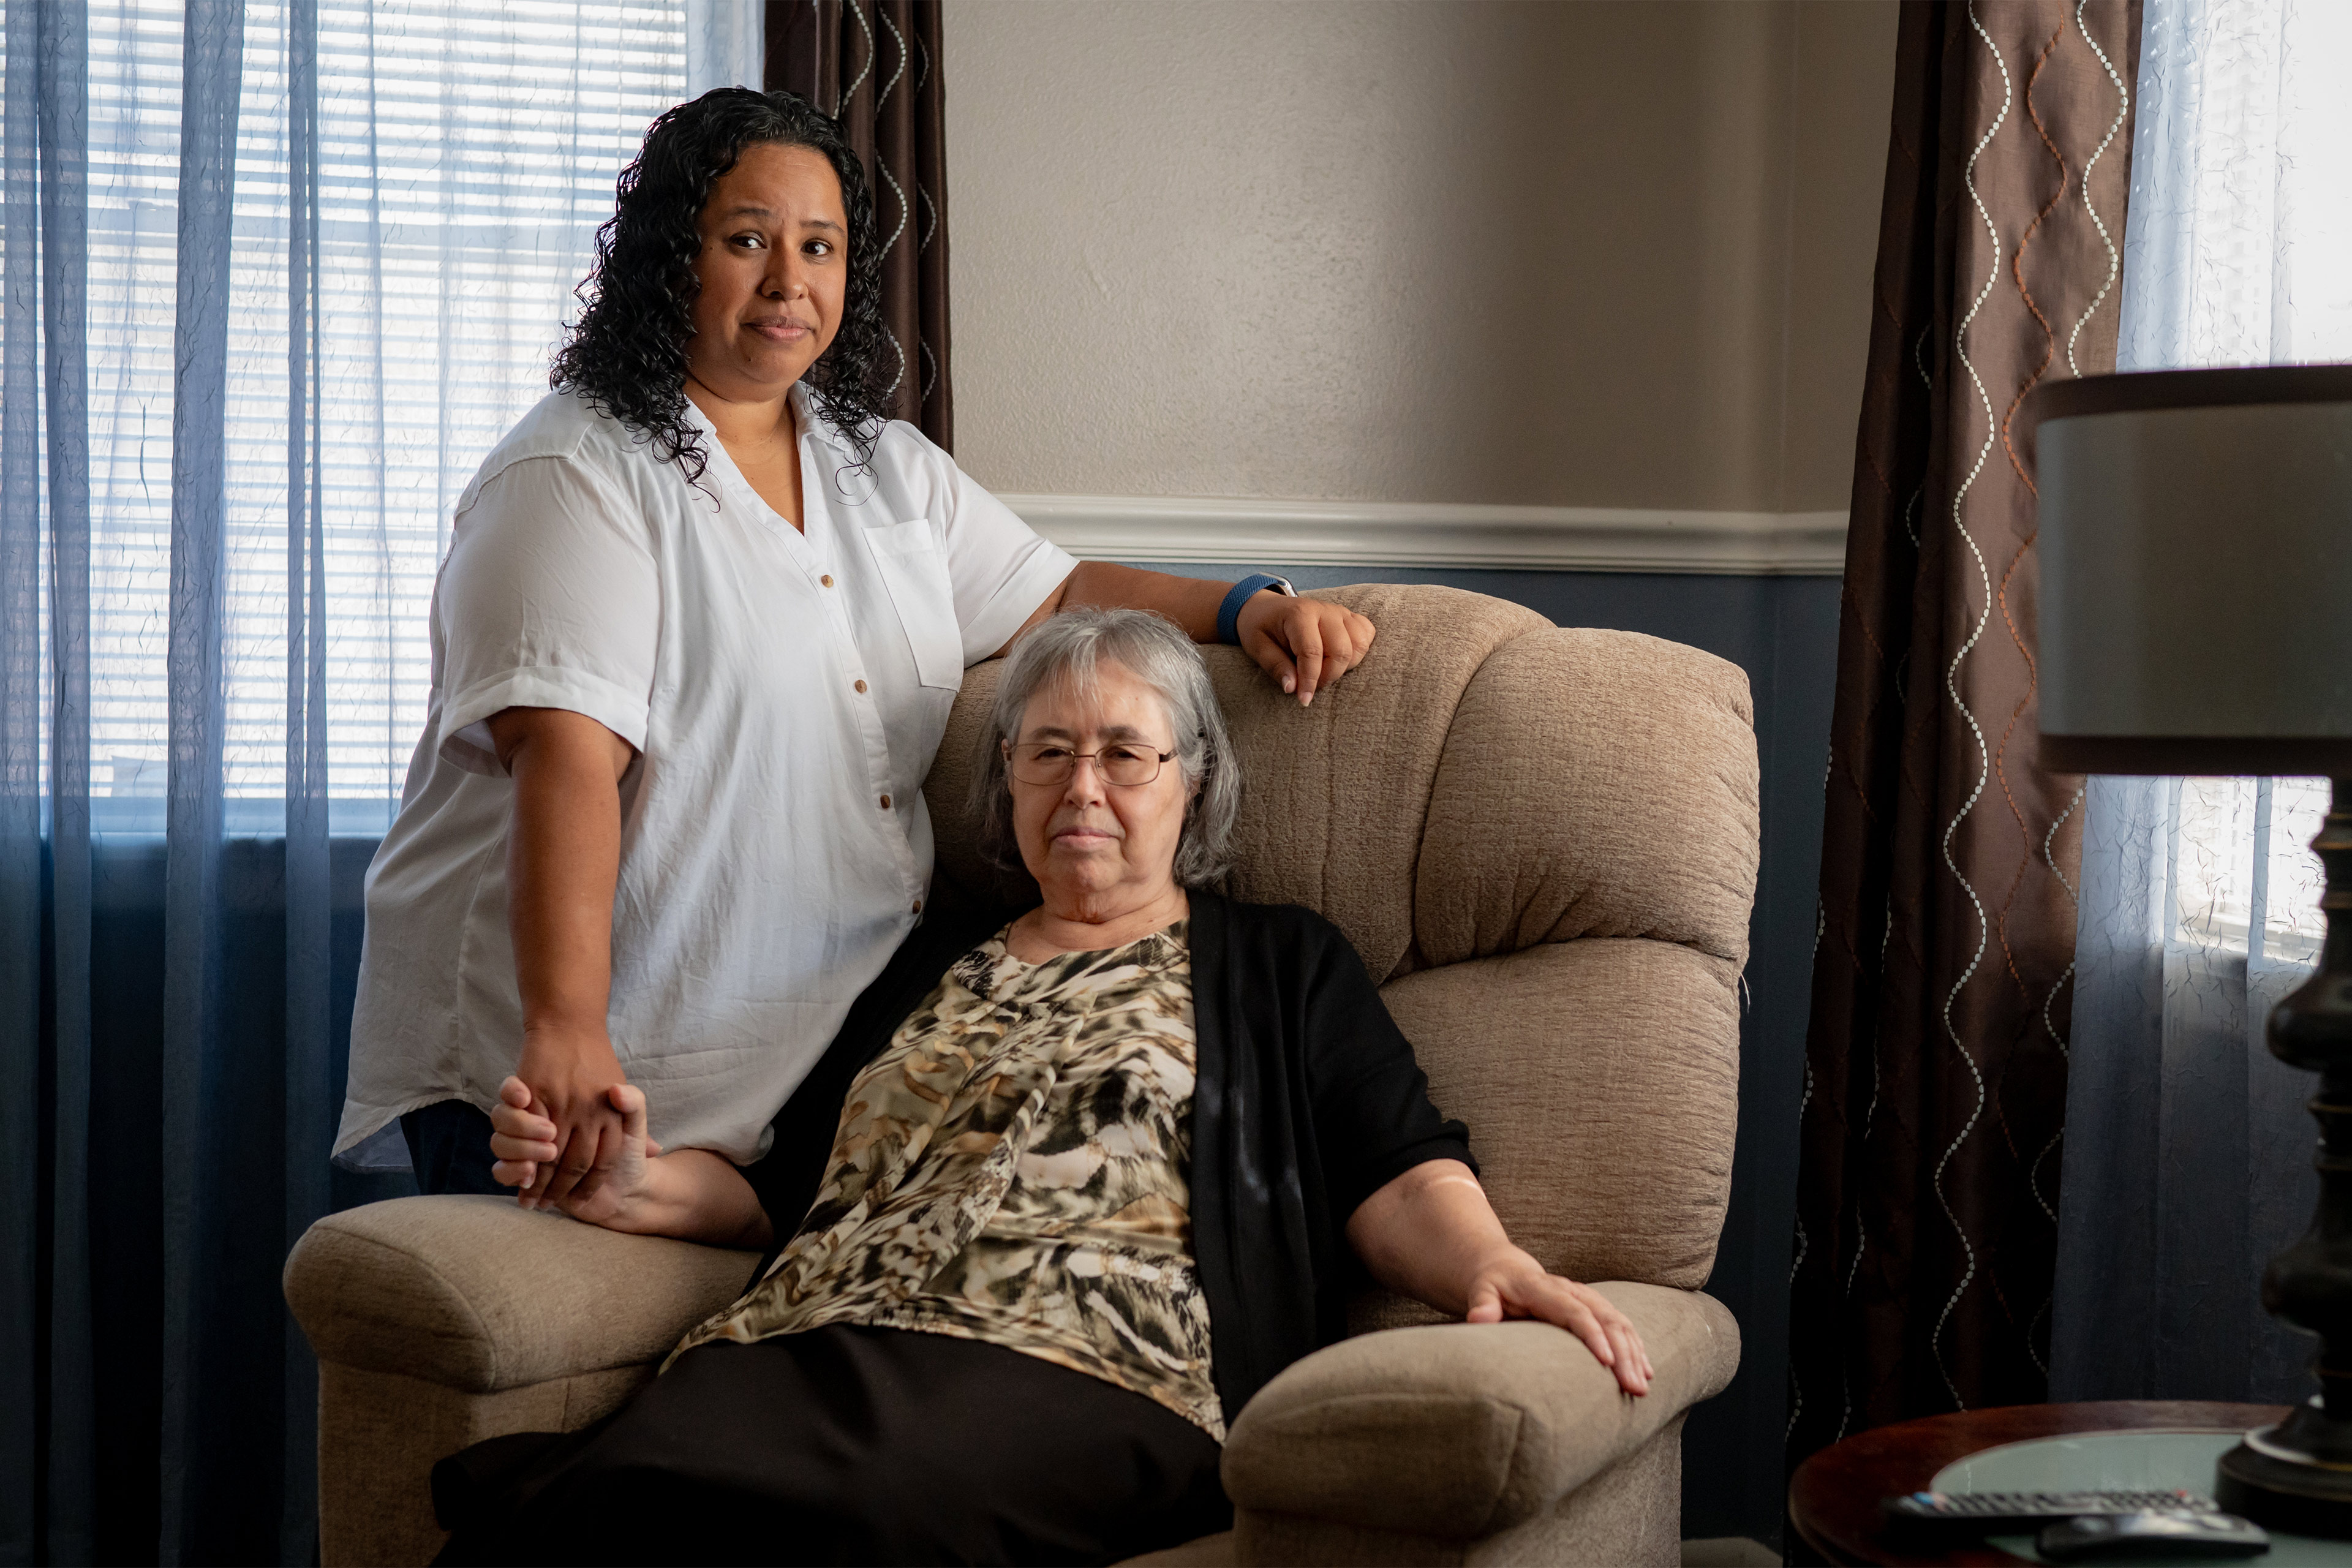 A photo of an older woman sitting in a chair while her adult daughter stands next to her.